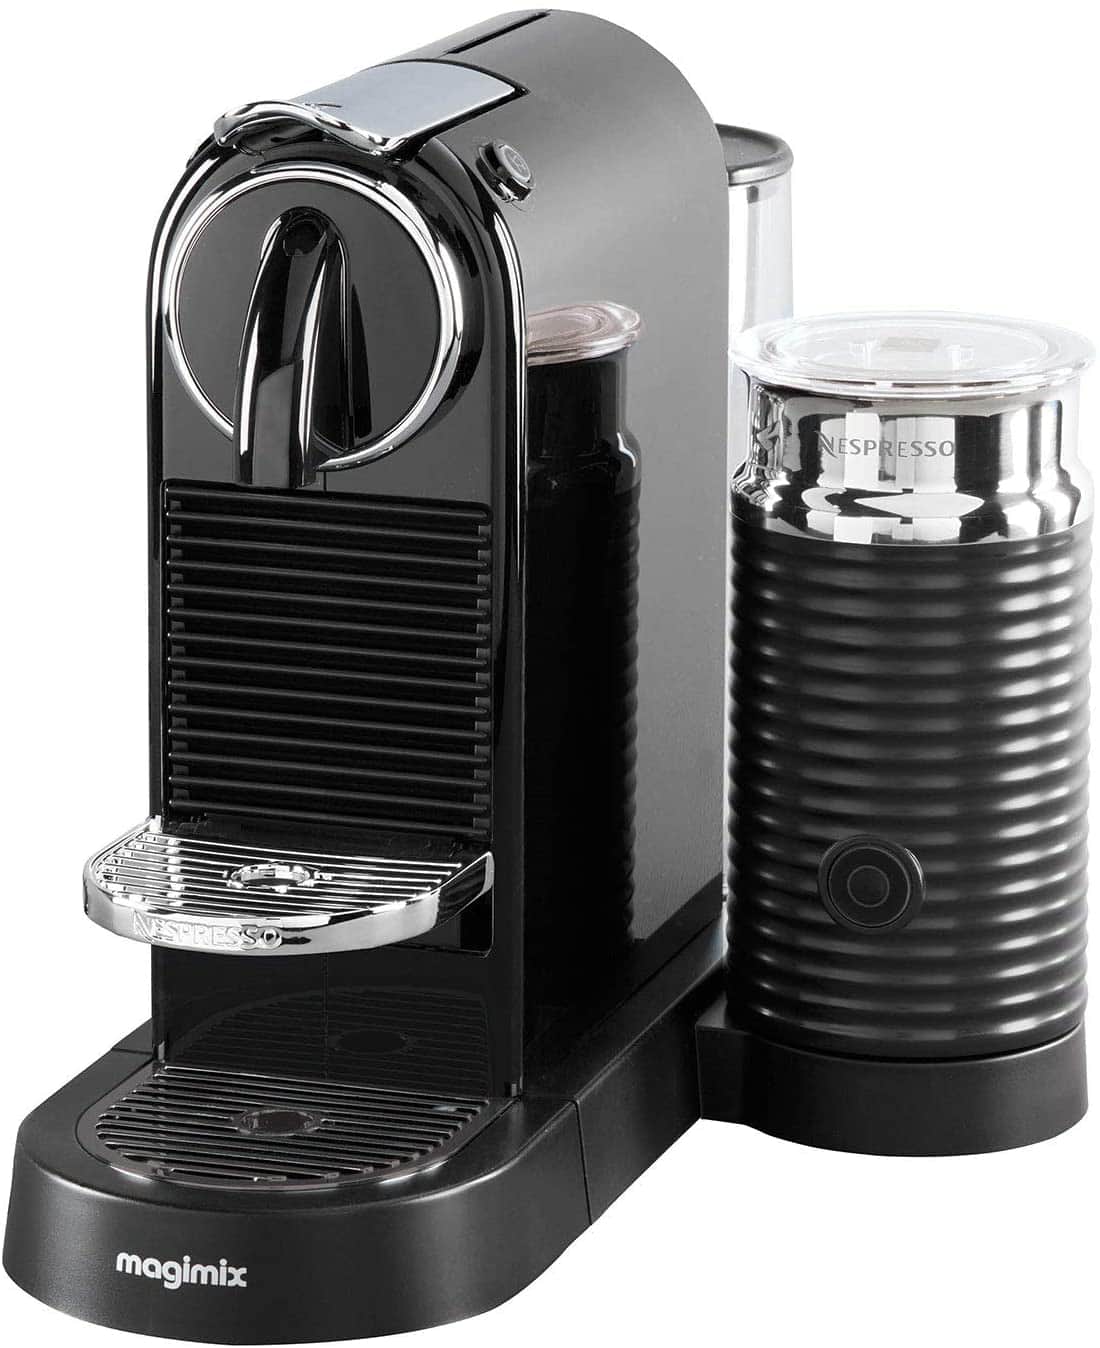 https://coffee-reviewers.com/wp-content/uploads/2021/04/Nespresso-11317-Citiz-and-Milk-Frother-Machine.jpg